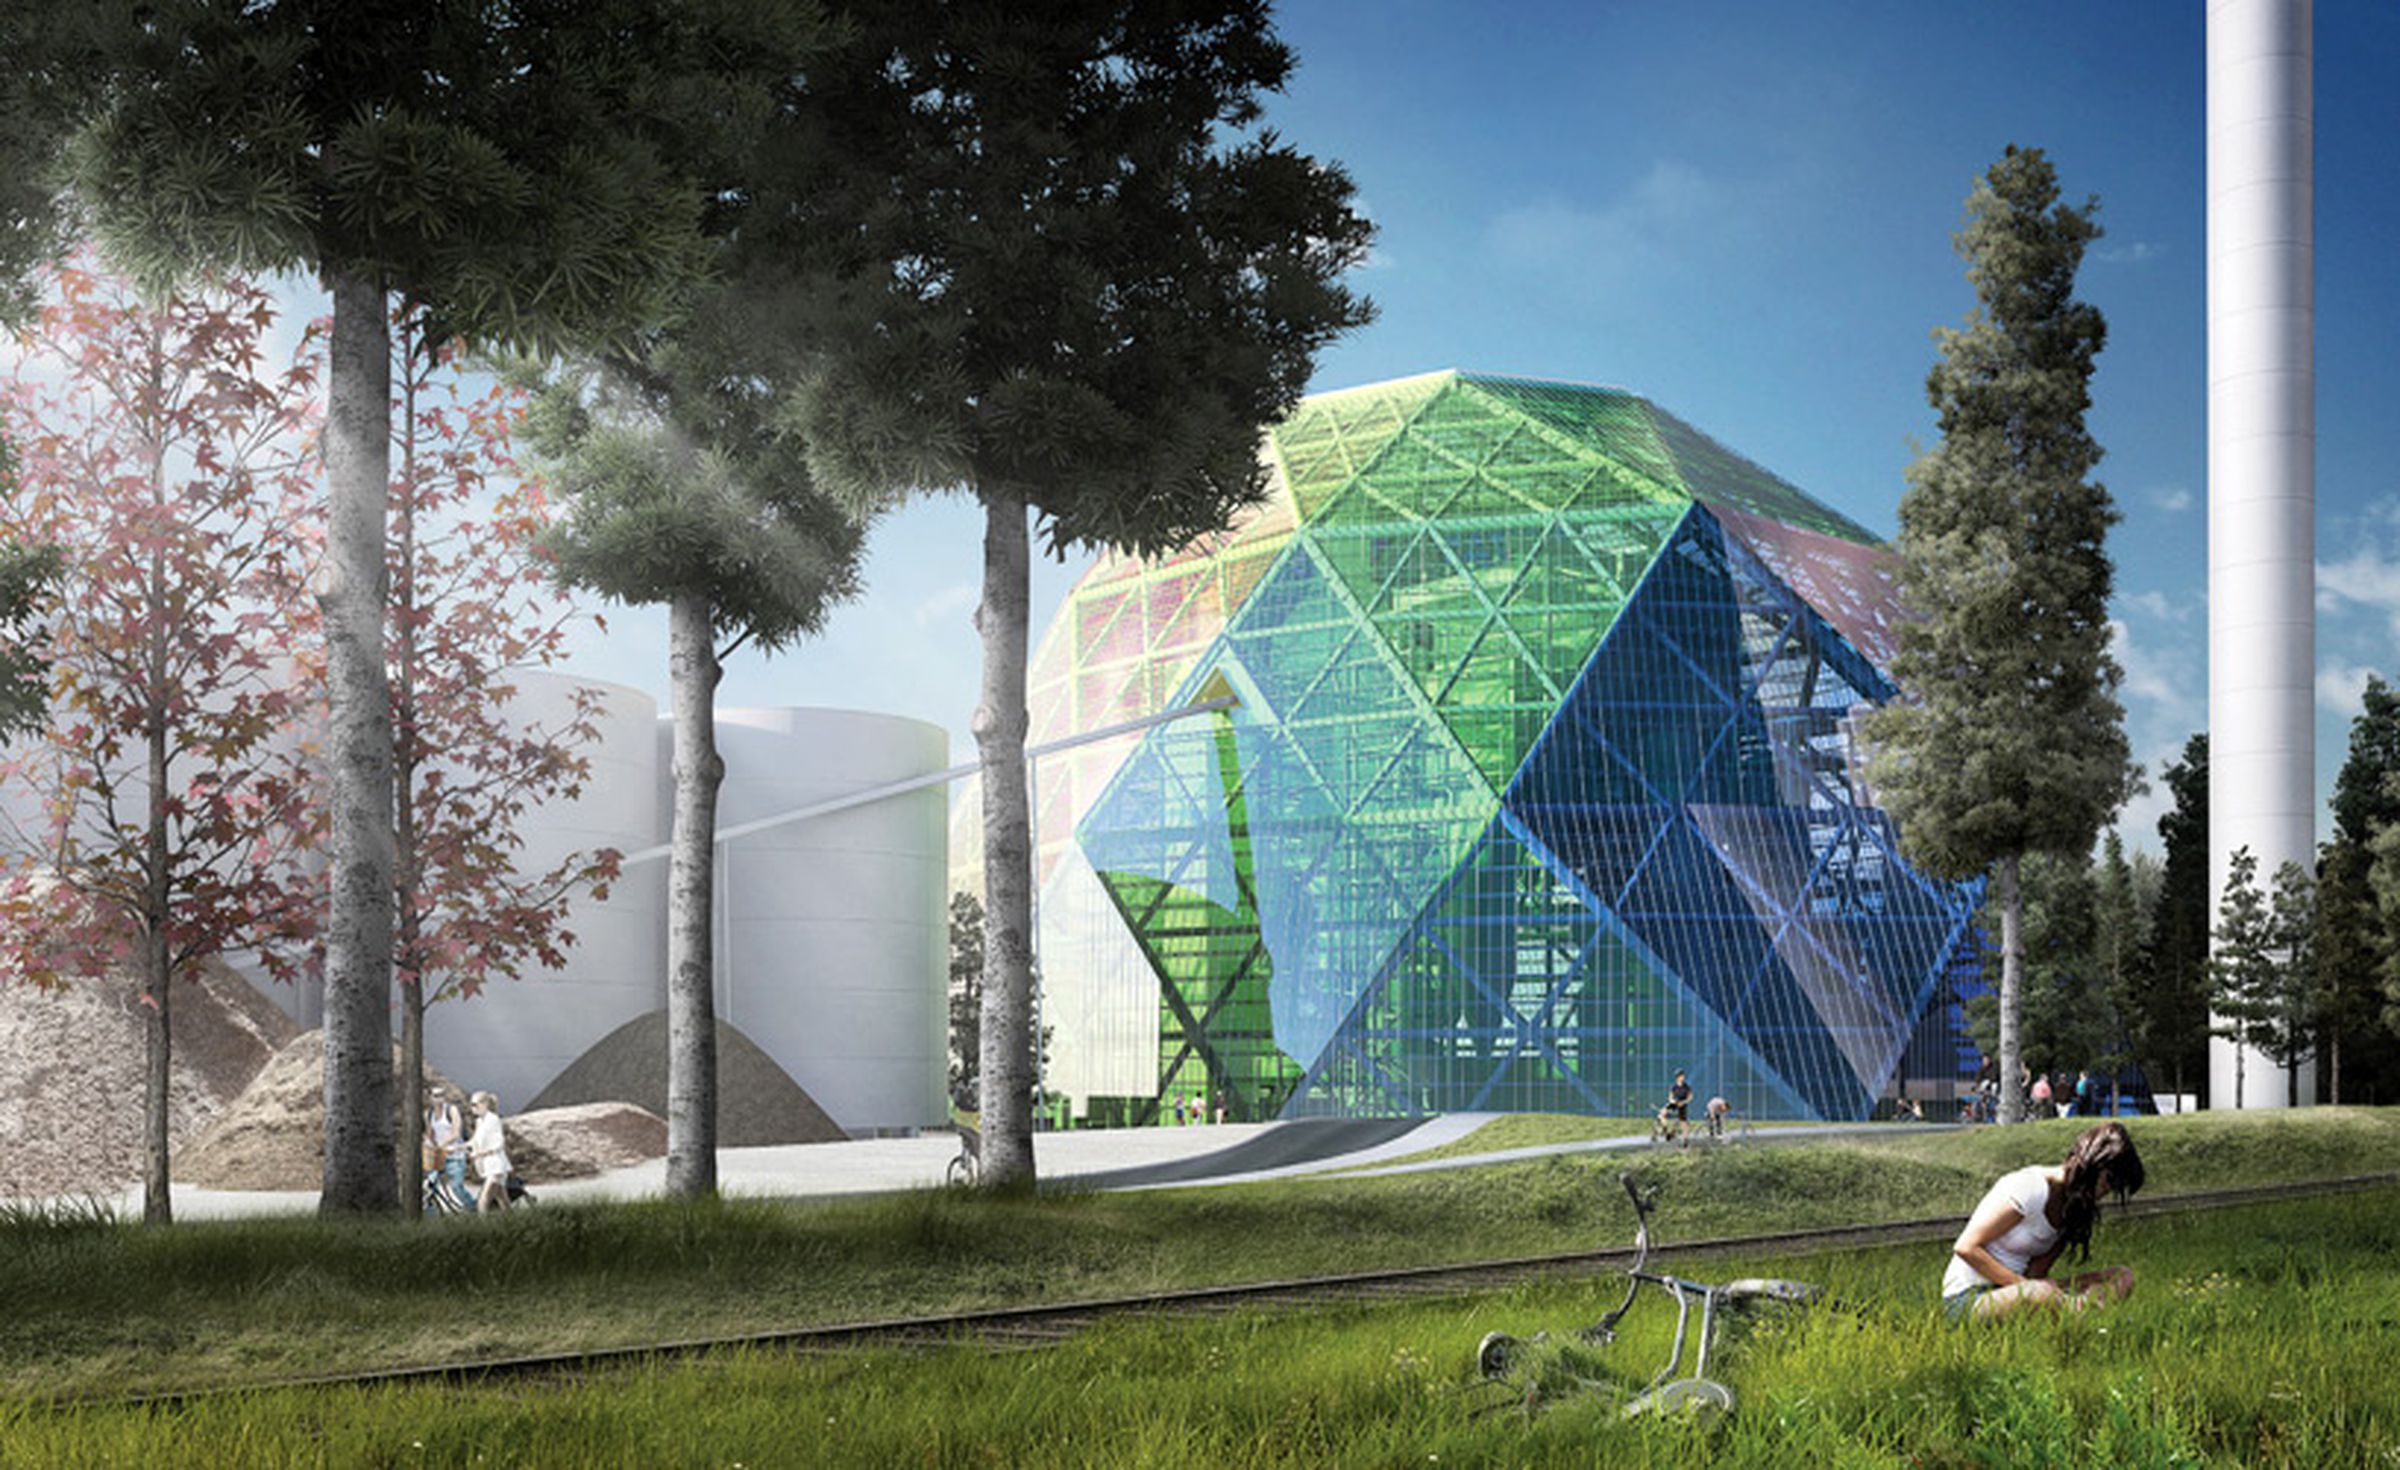 The 'Diamond Dome': a rainbow-colored biomass power plant in Sweden